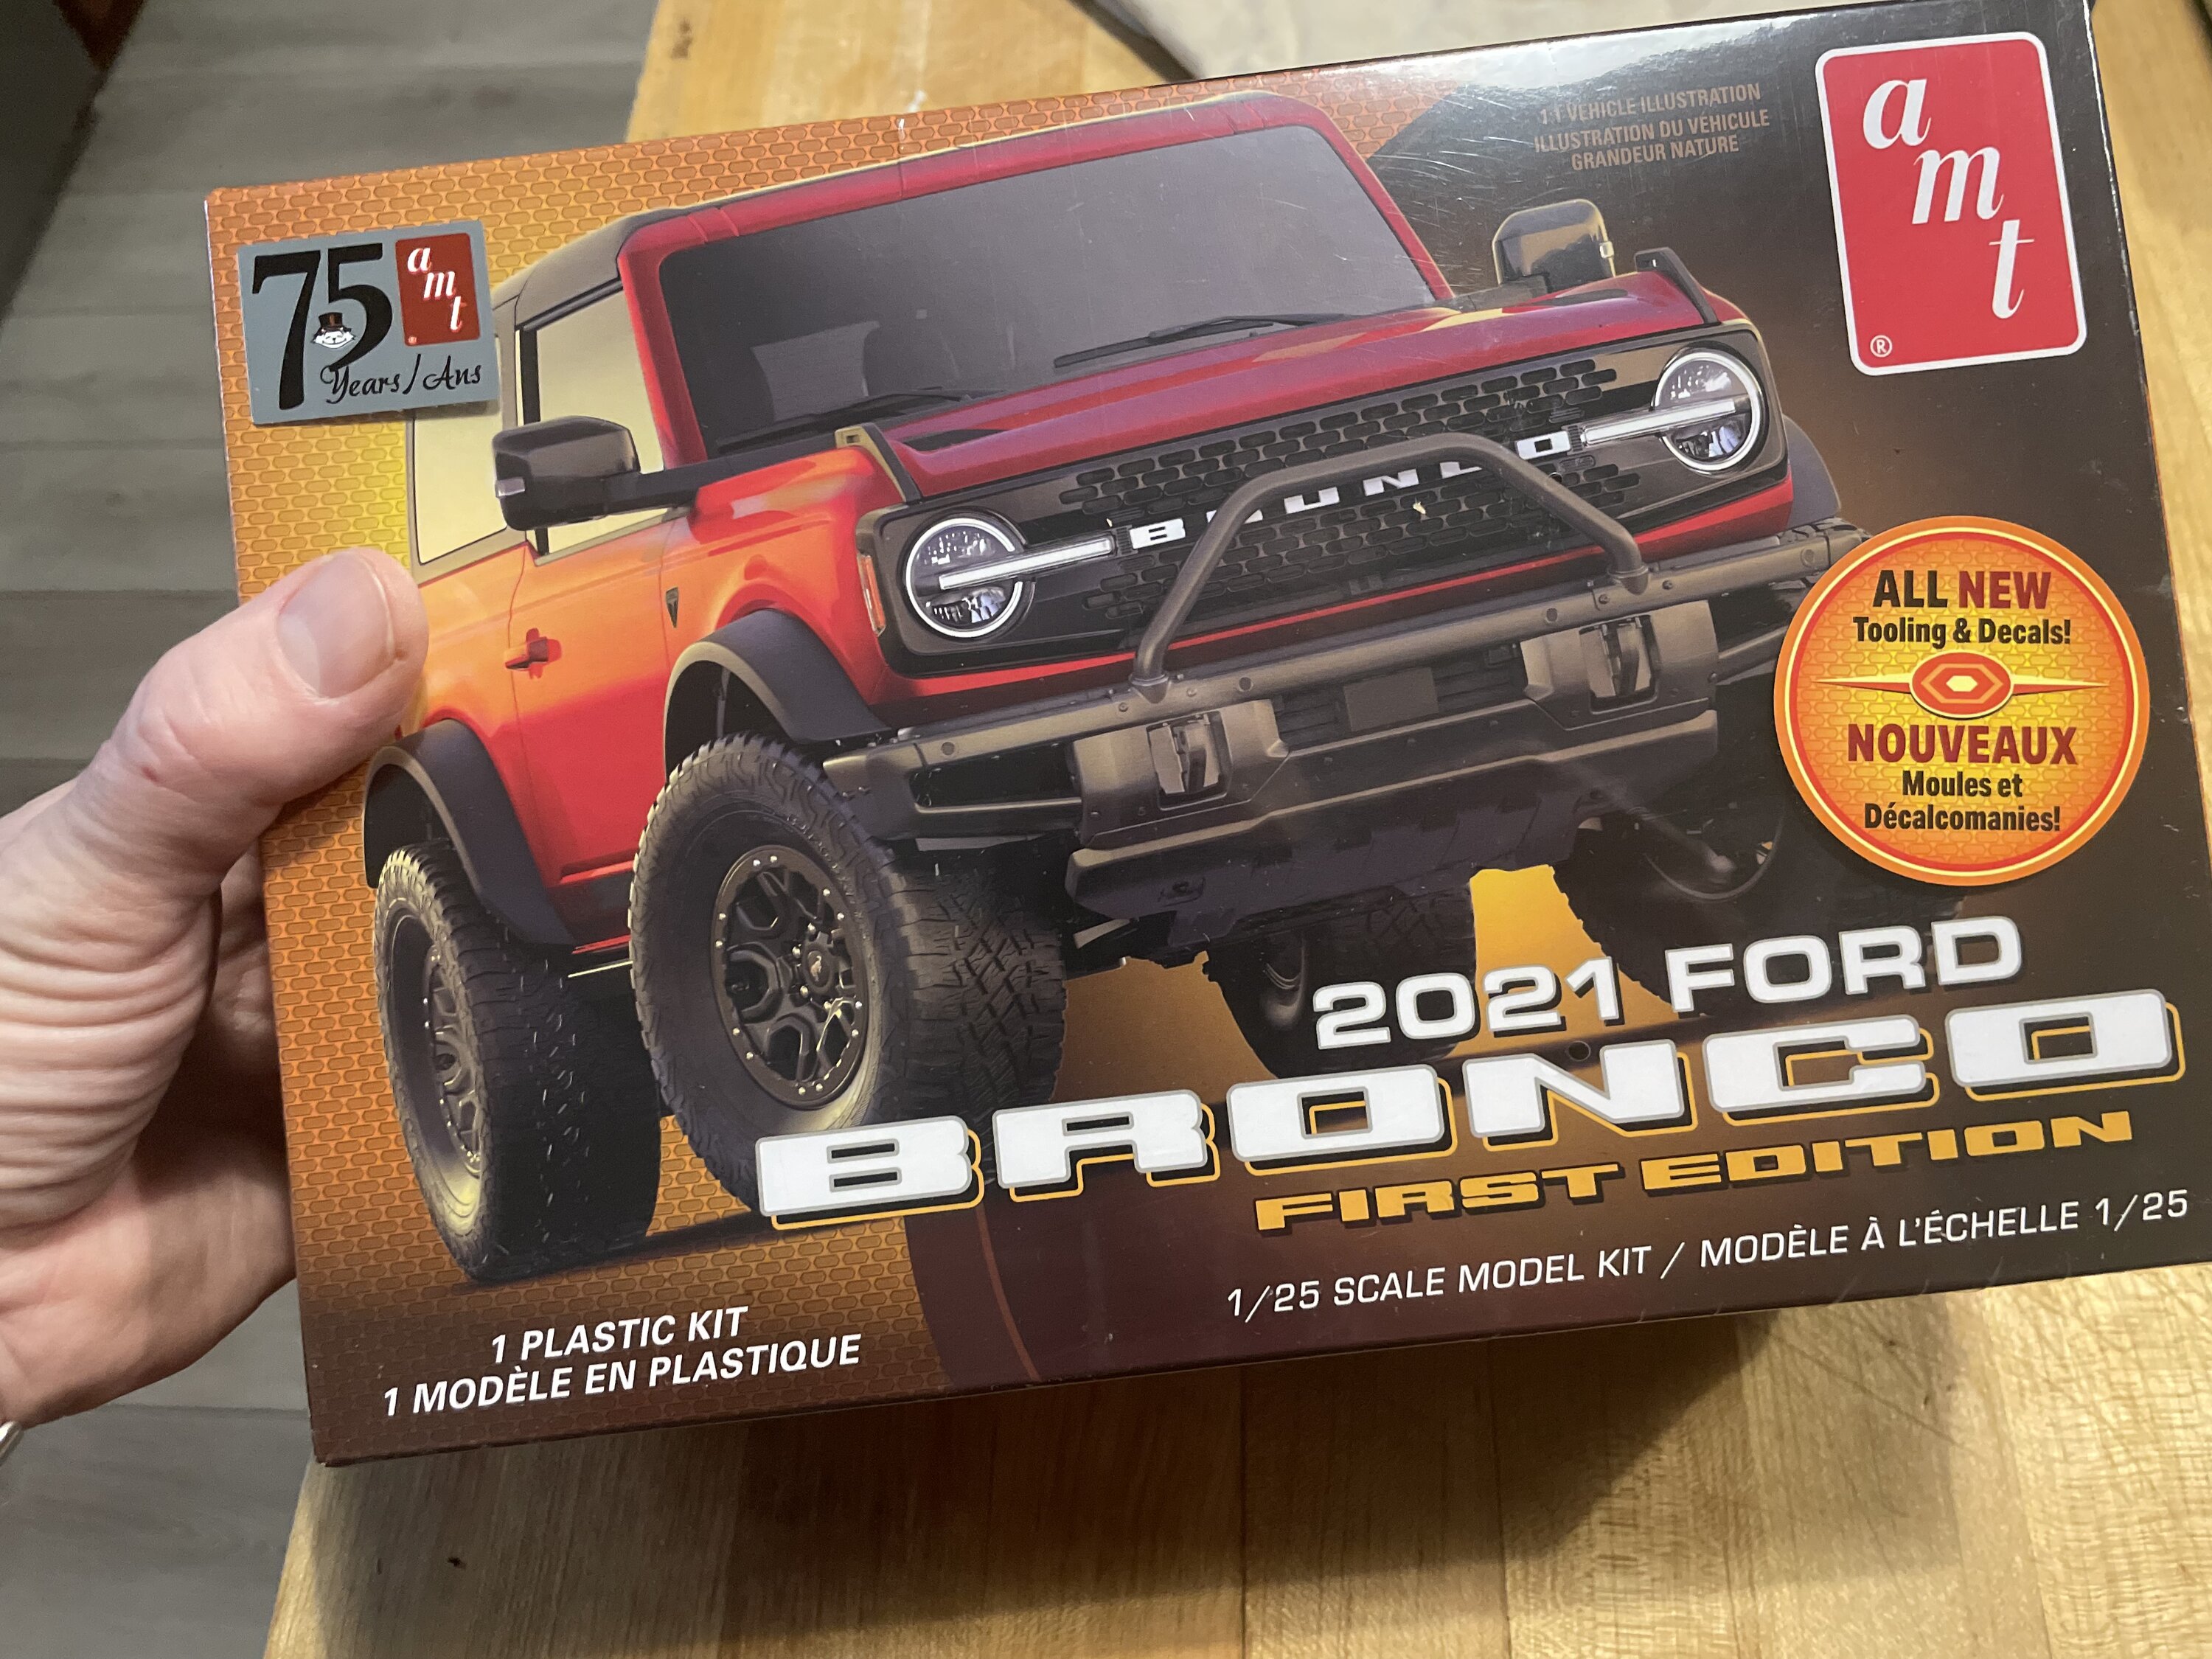 Ford Bronco Bronco First Edition 2-Door 1/25 Scale Model Kit from AMT 71776881724__A03183A1-C43A-4C30-9074-CE5F52BA7C15